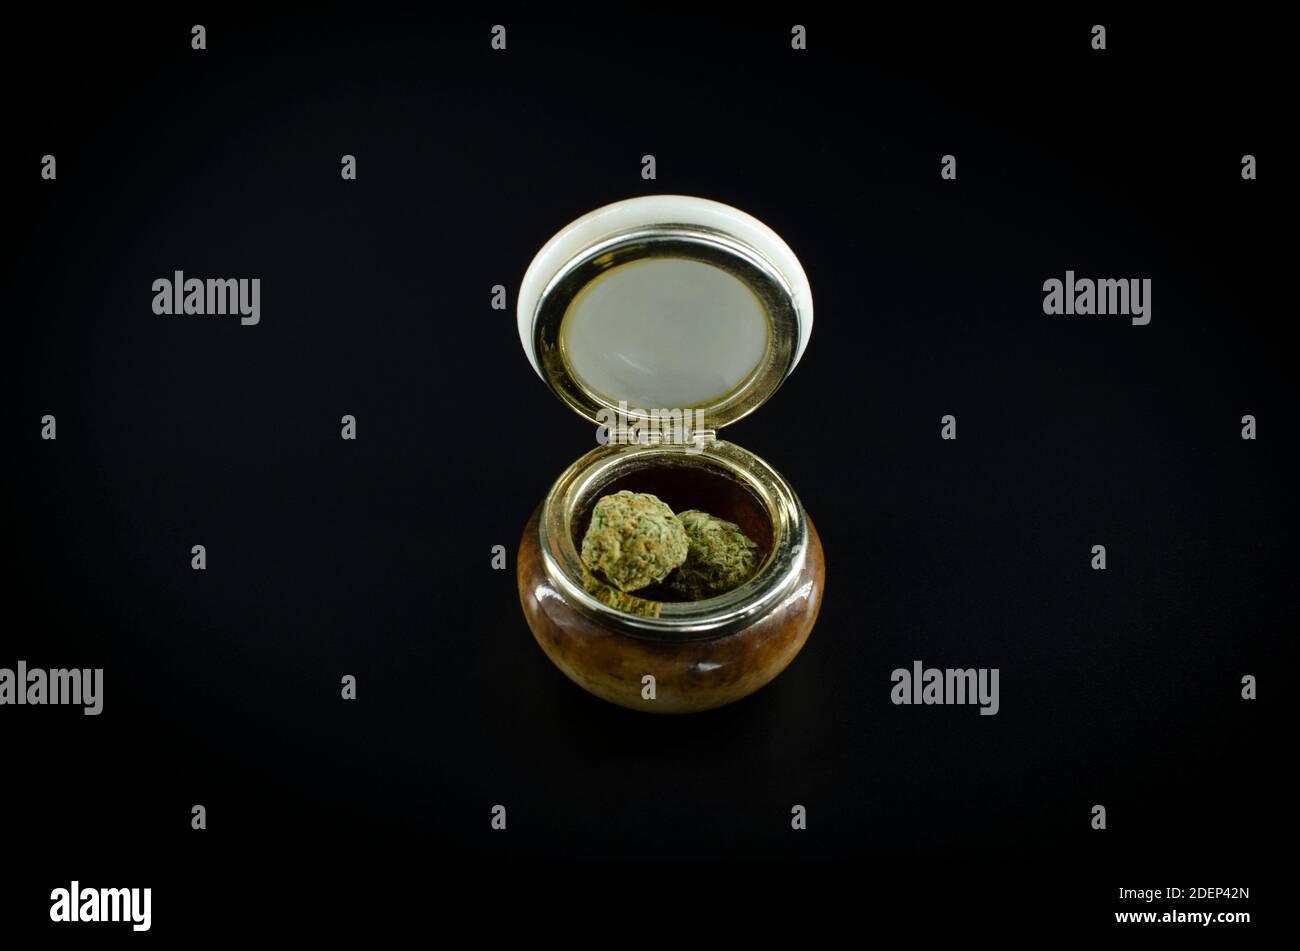 Weed. Cannabis Buds On A ceramic Jar Isolated Over Black Background Stock Photo